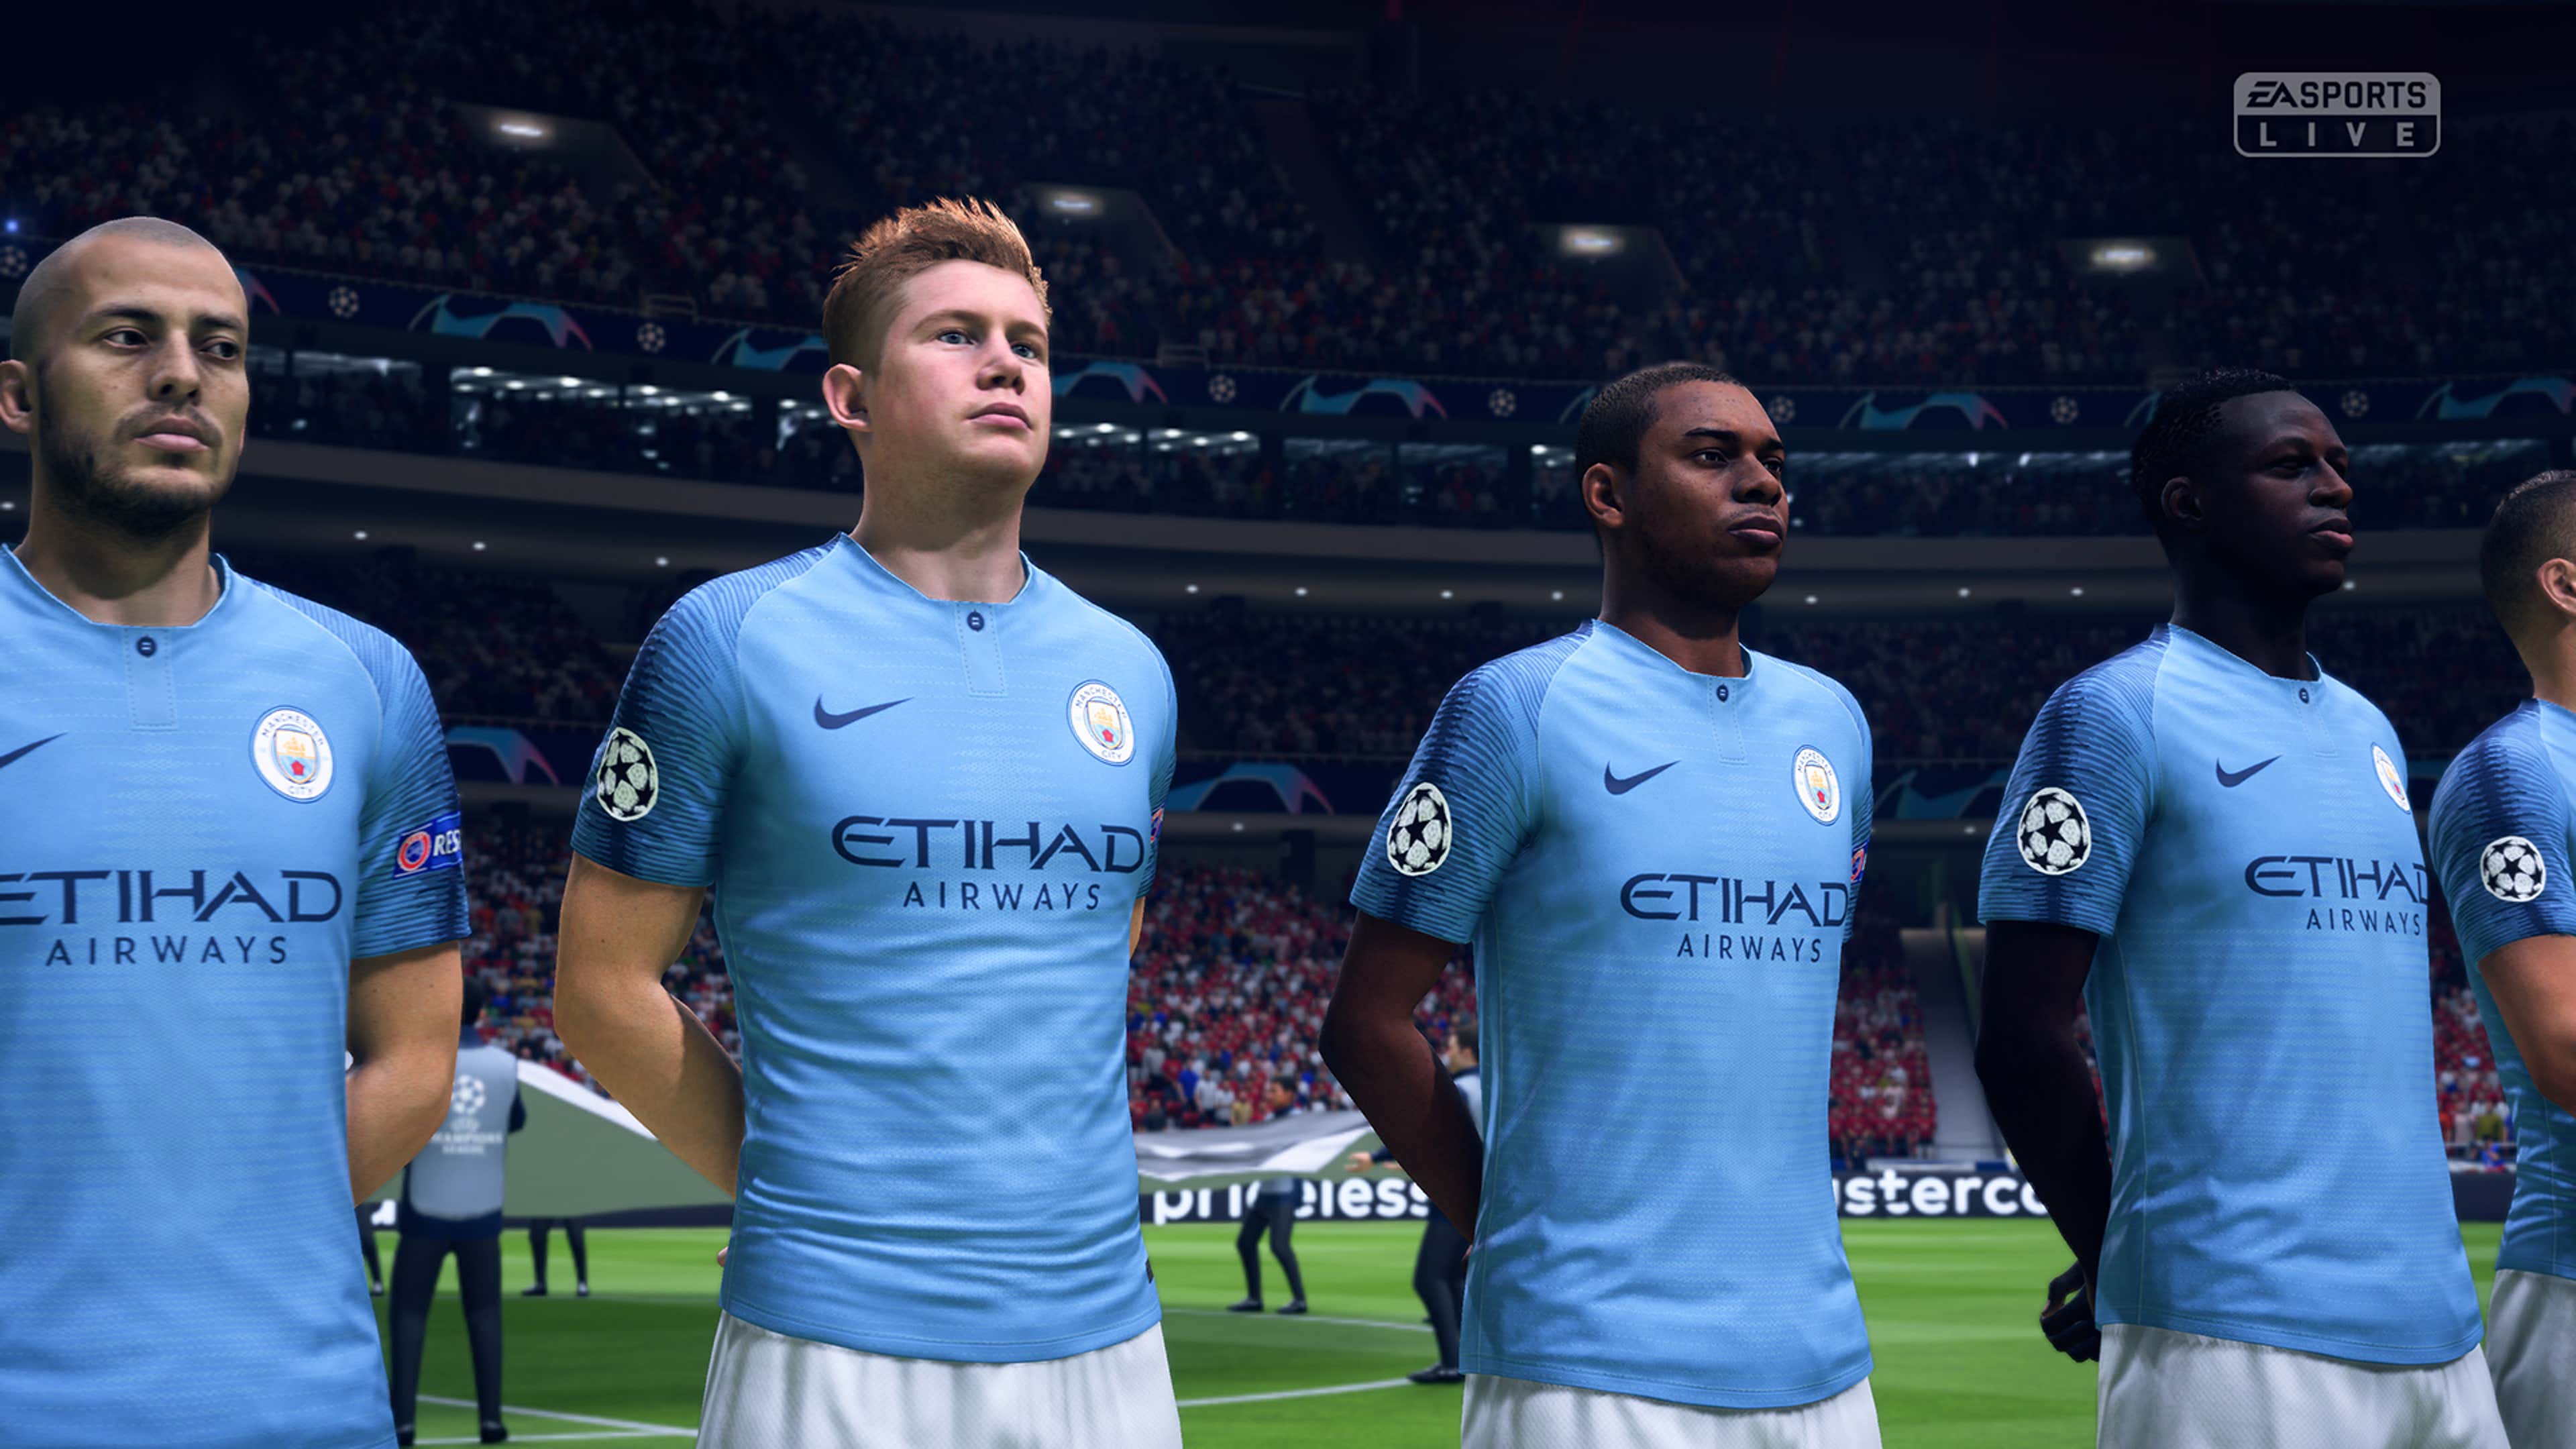 Brazilian pro soccer teams return to FIFA 16, but not its career modes -  Polygon